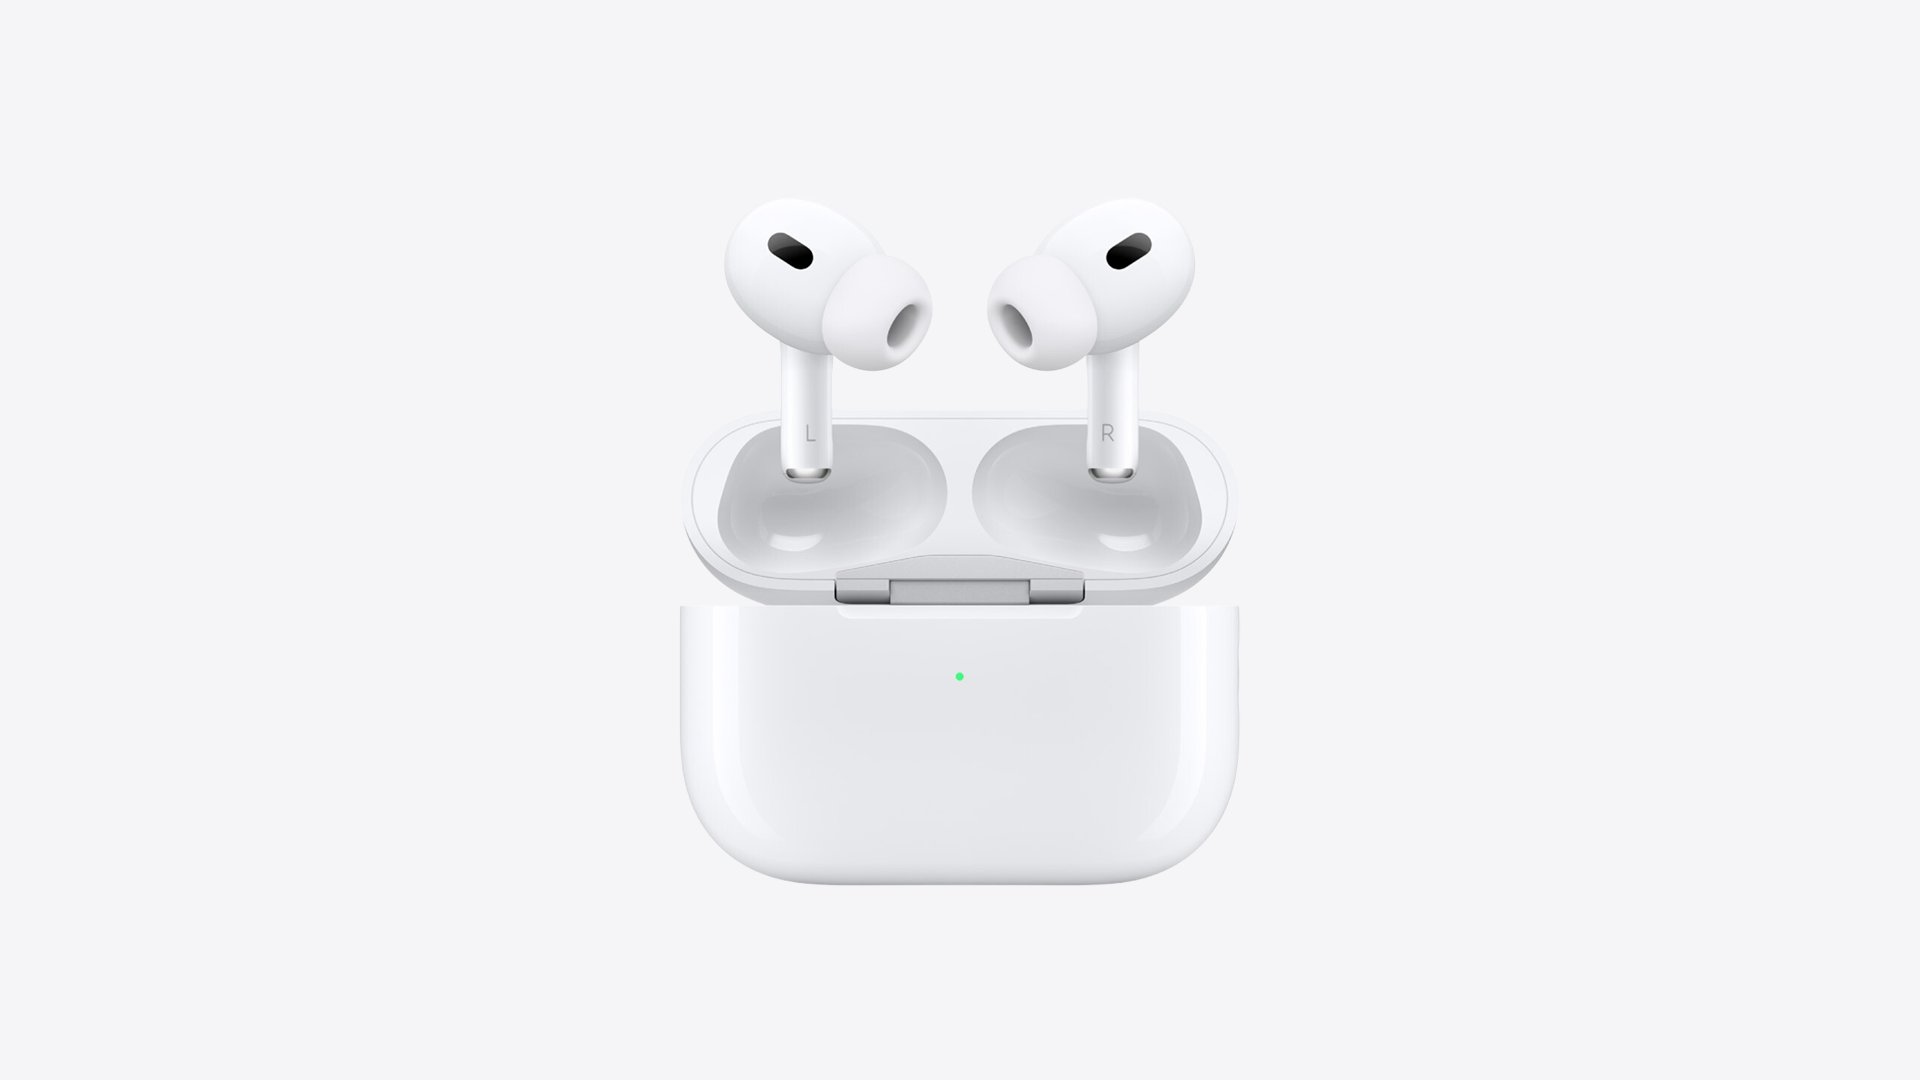 Buy AirPods Pro (2nd generation) online, Apple Store